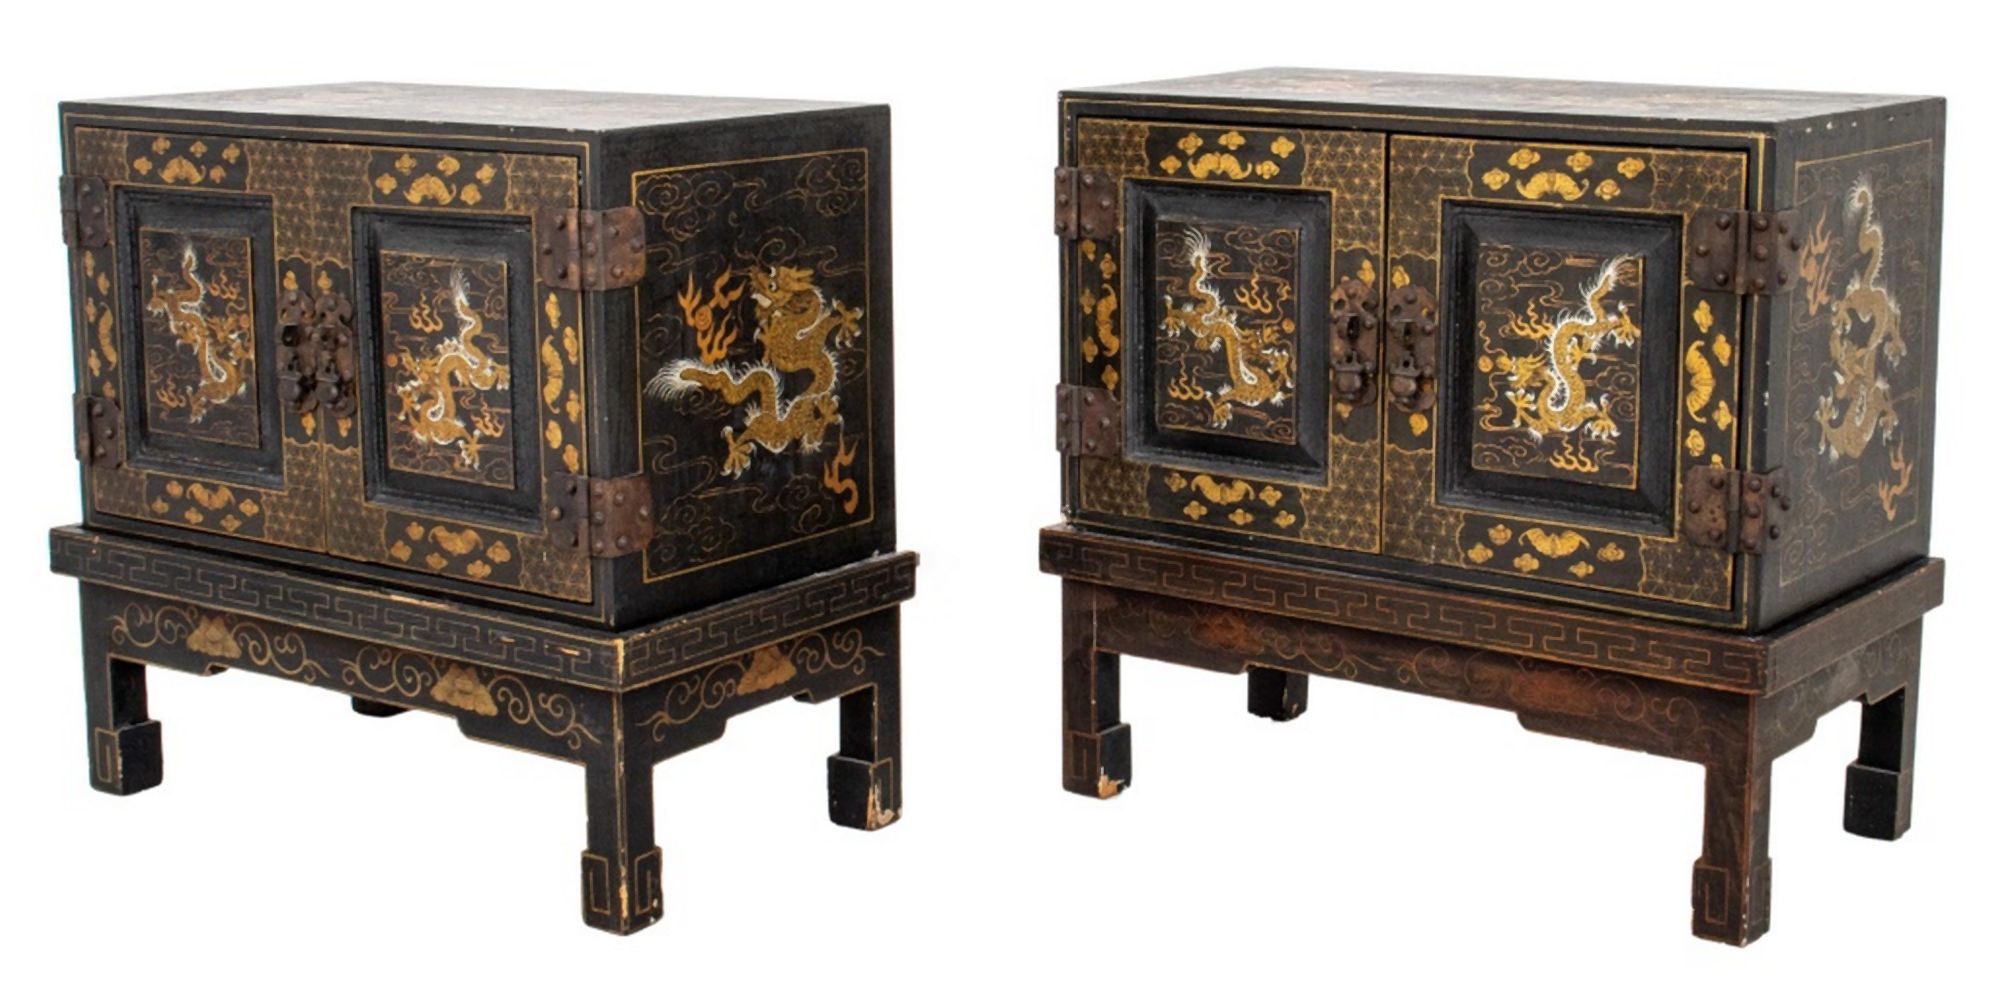 CHINOISERIE BLACK AND GILT DECORATED